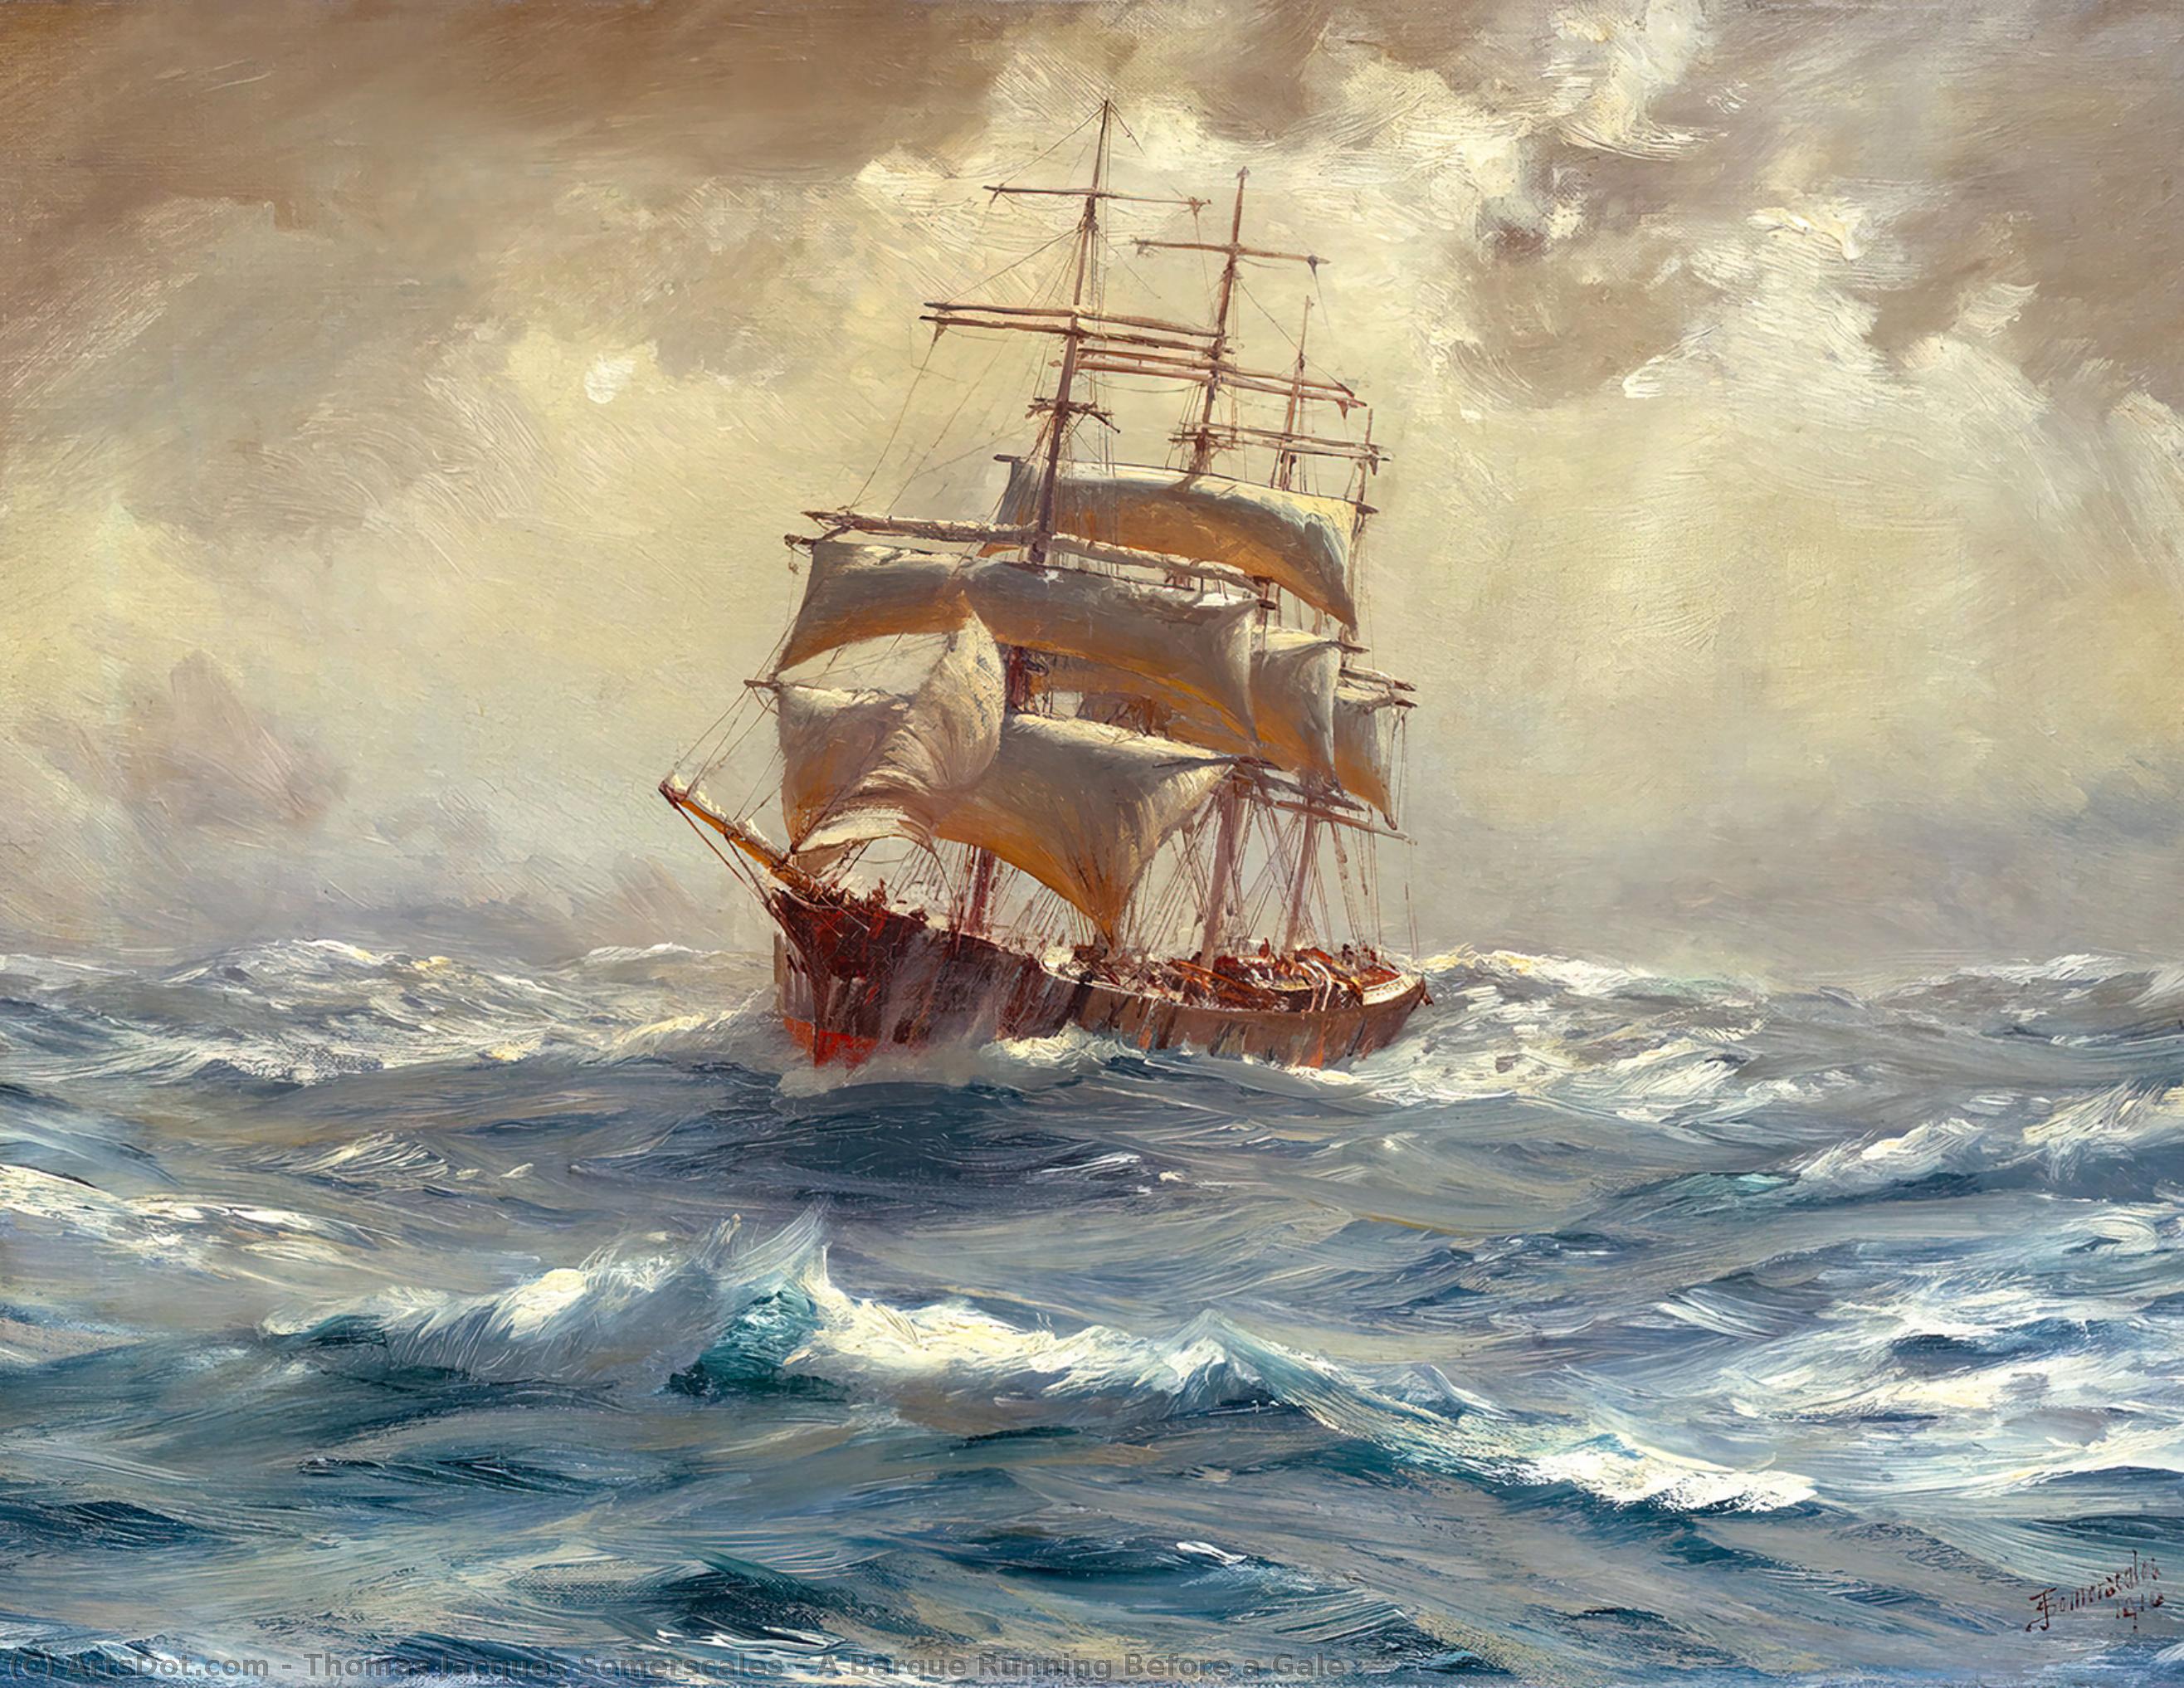 Buy Museum Art Reproductions A Barque Running Before a Gale, 1910 by Thomas Jacques Somerscales (1842-1927) | ArtsDot.com